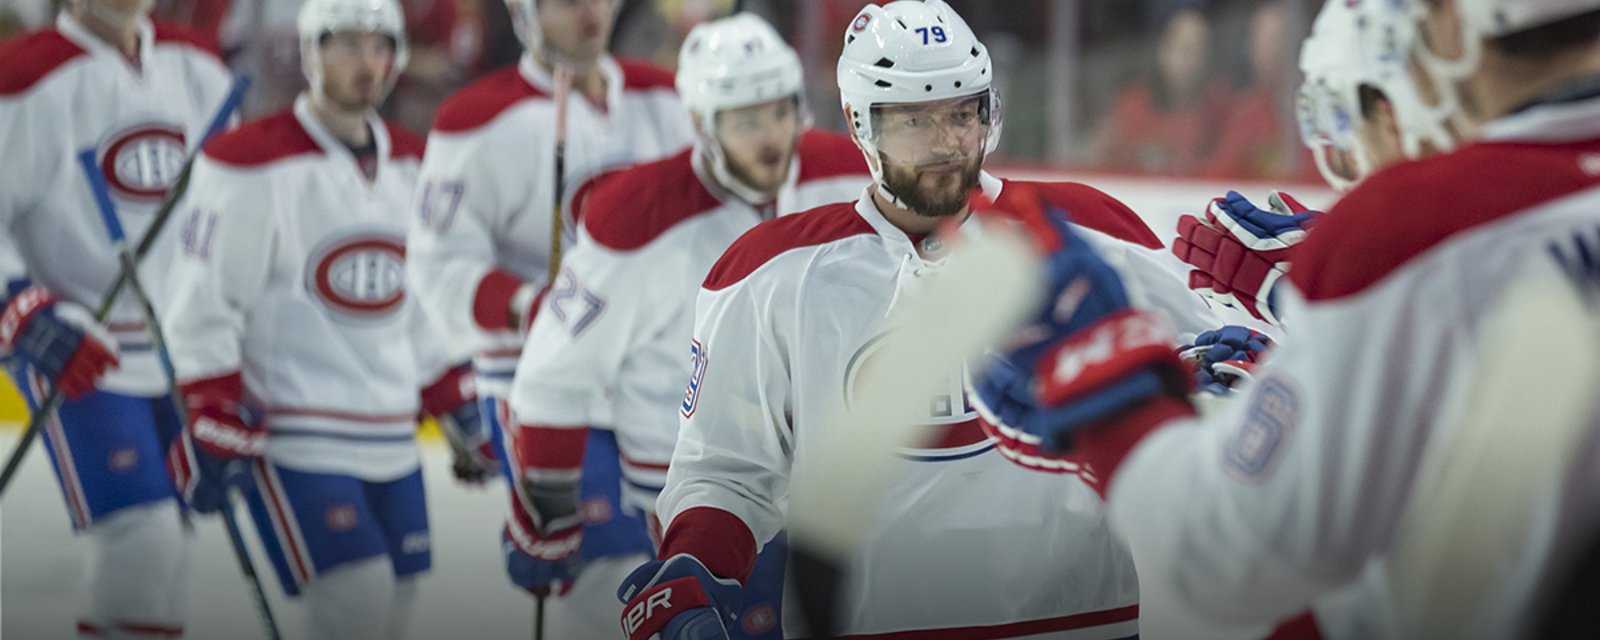 Former Habs player announces his retirement